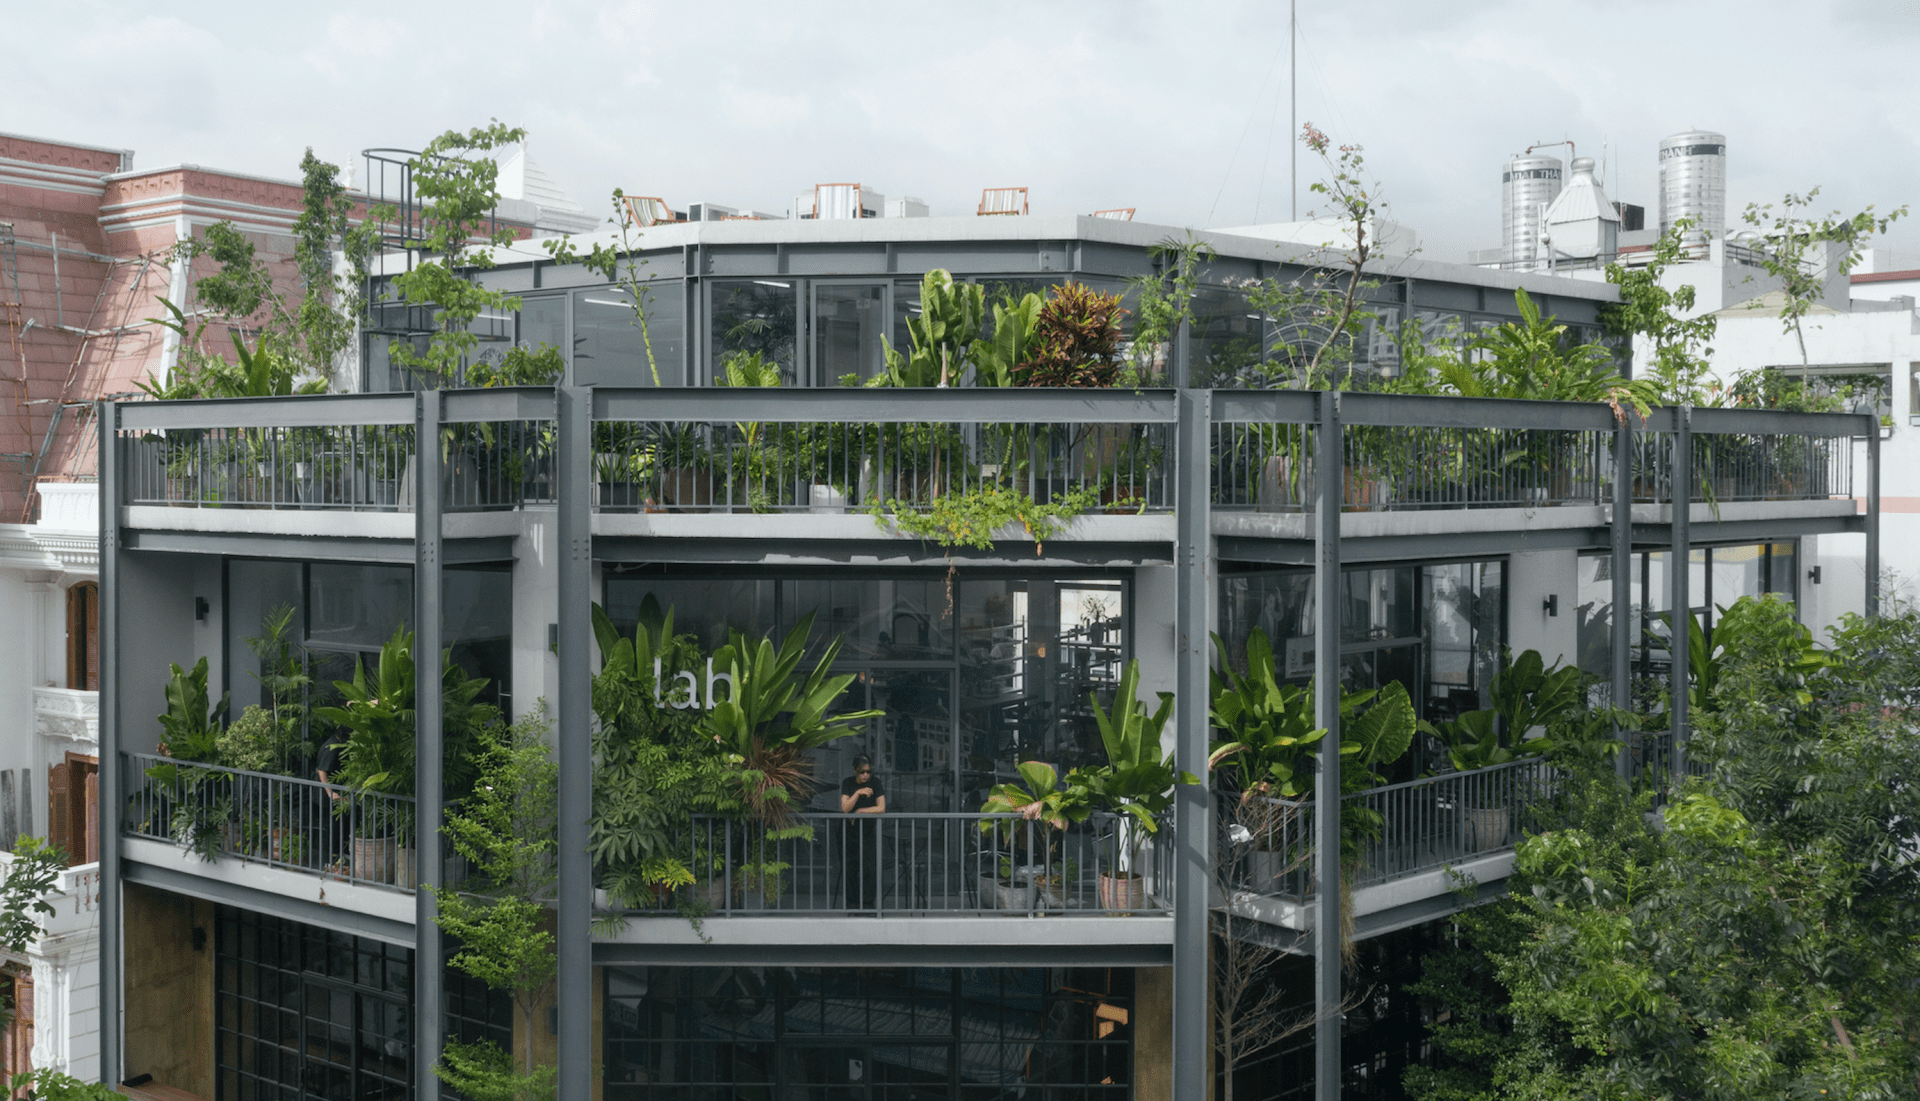 This leafy Vietnamese office brings nature into the workplace